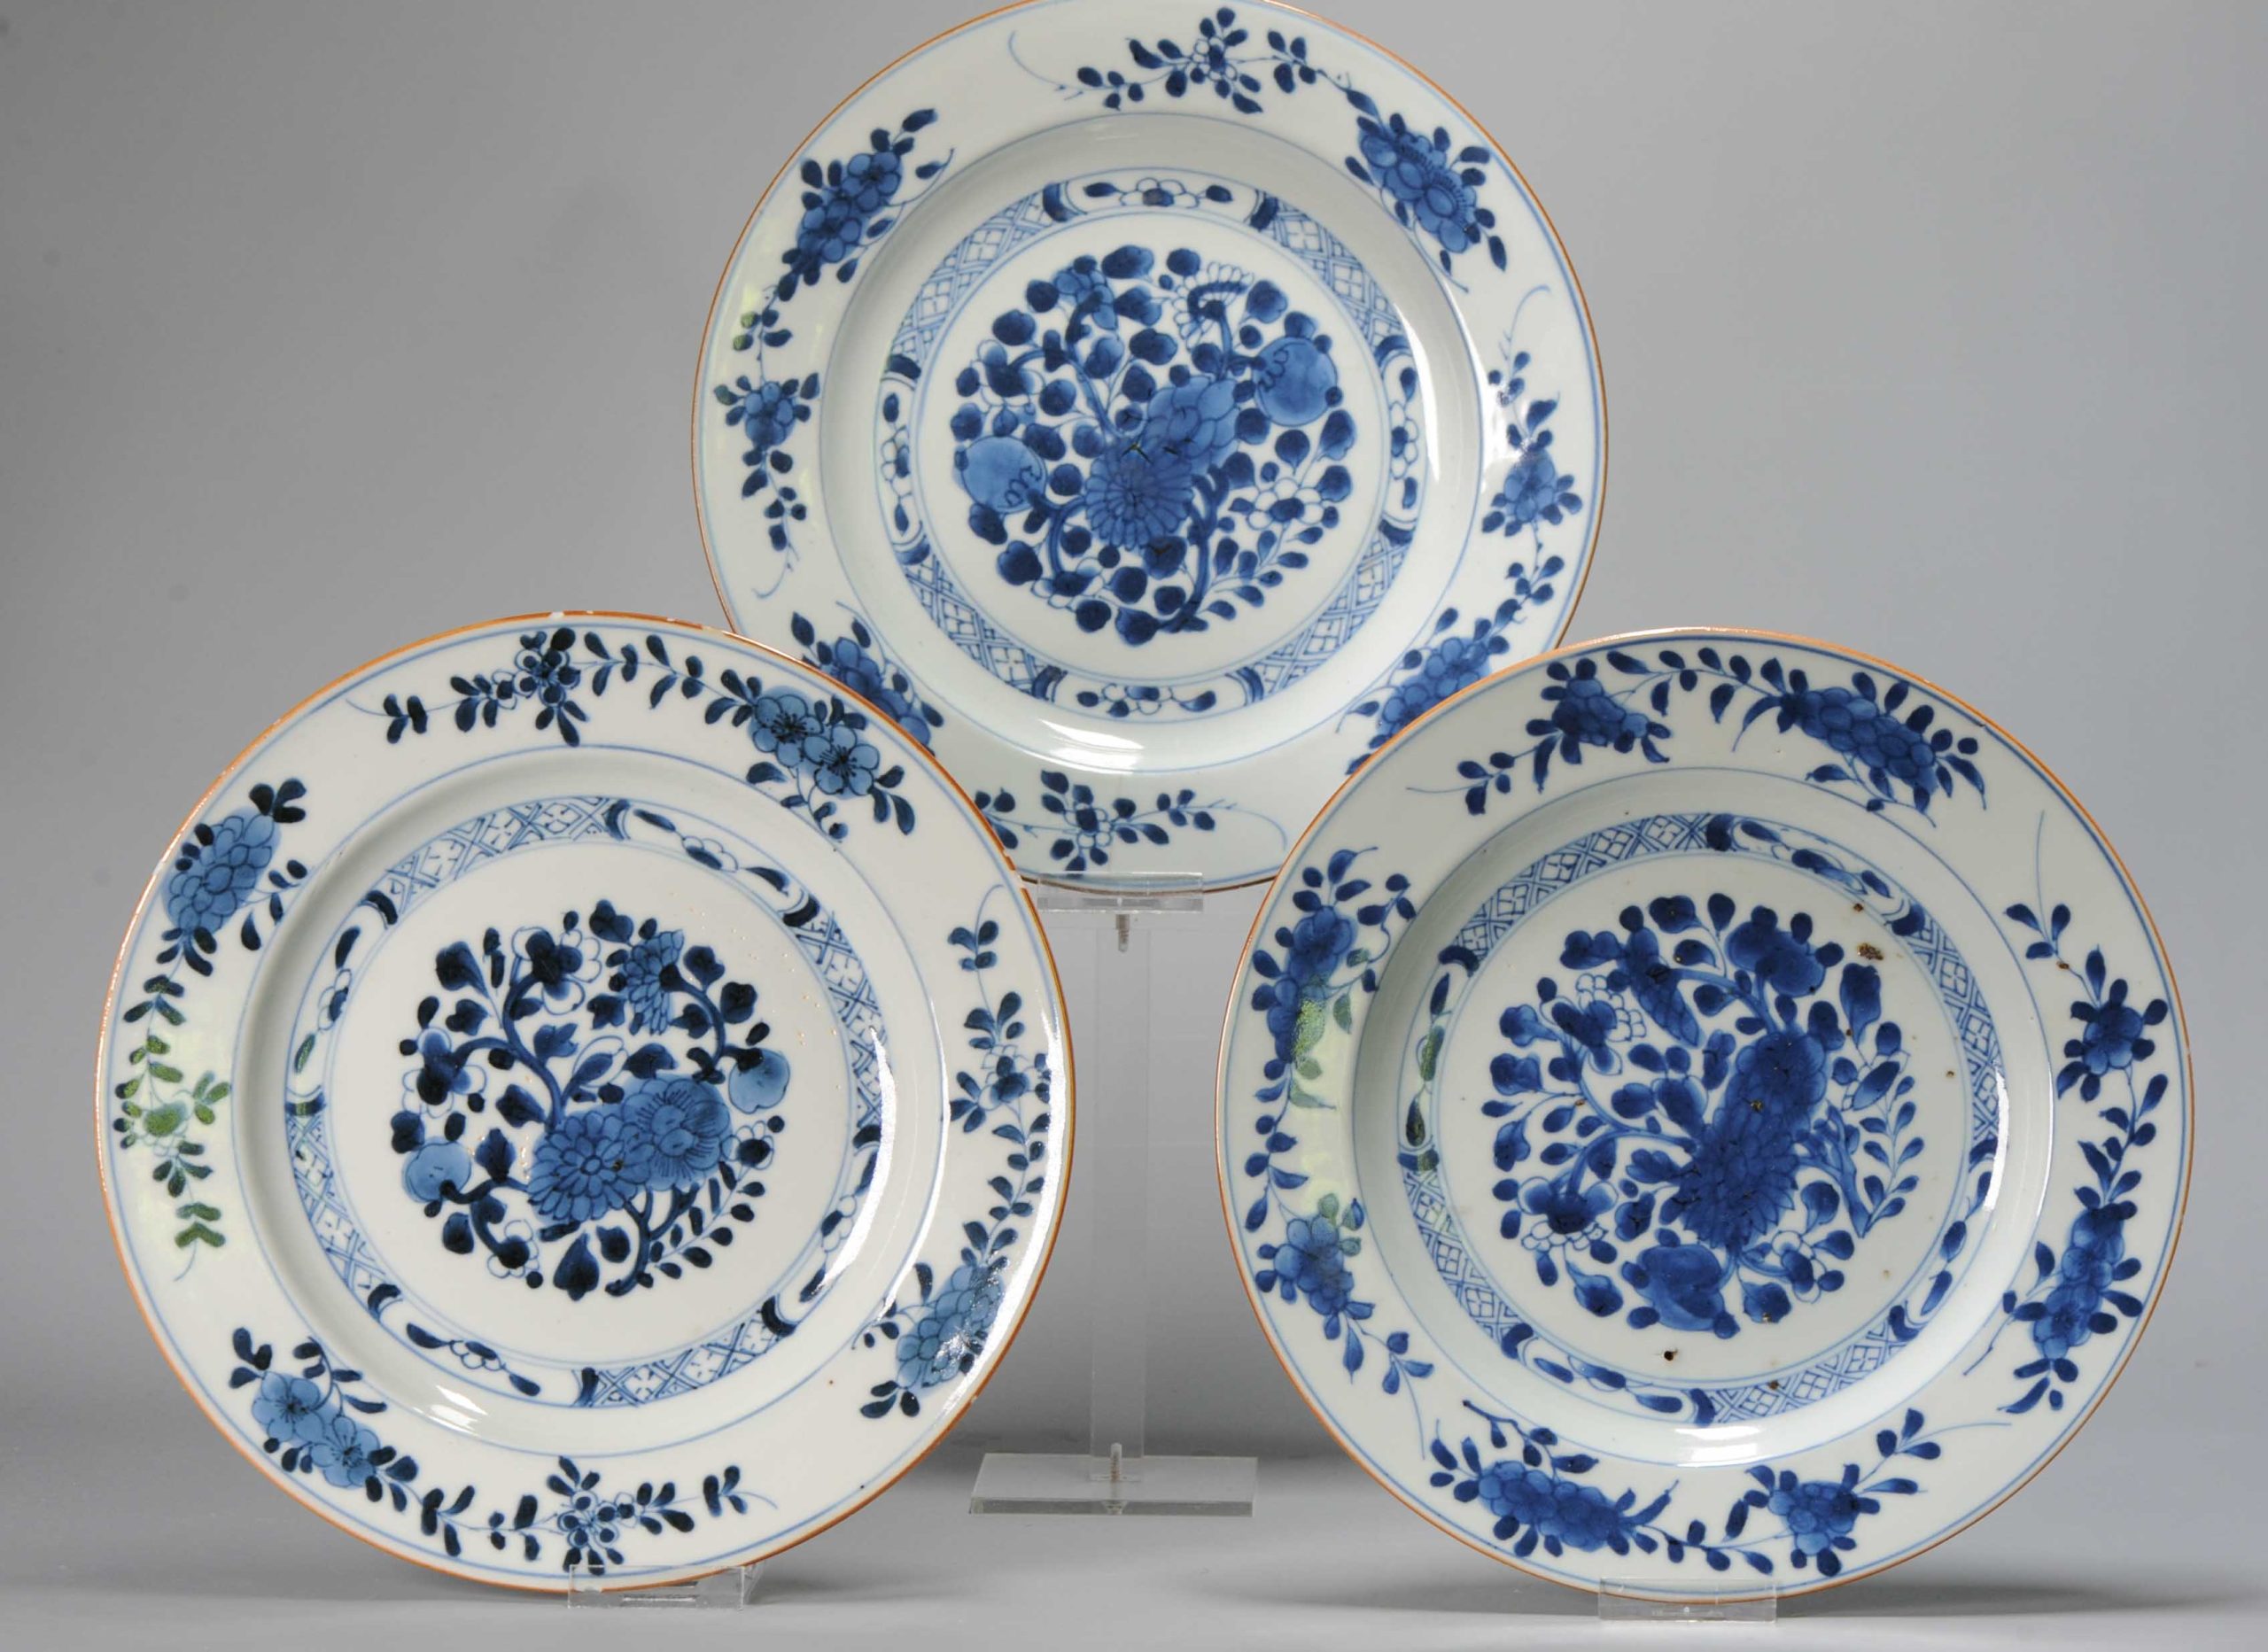 #3 Antique Chinese Porcelain 18th C Qing Period Blue White Set Dinner Plates